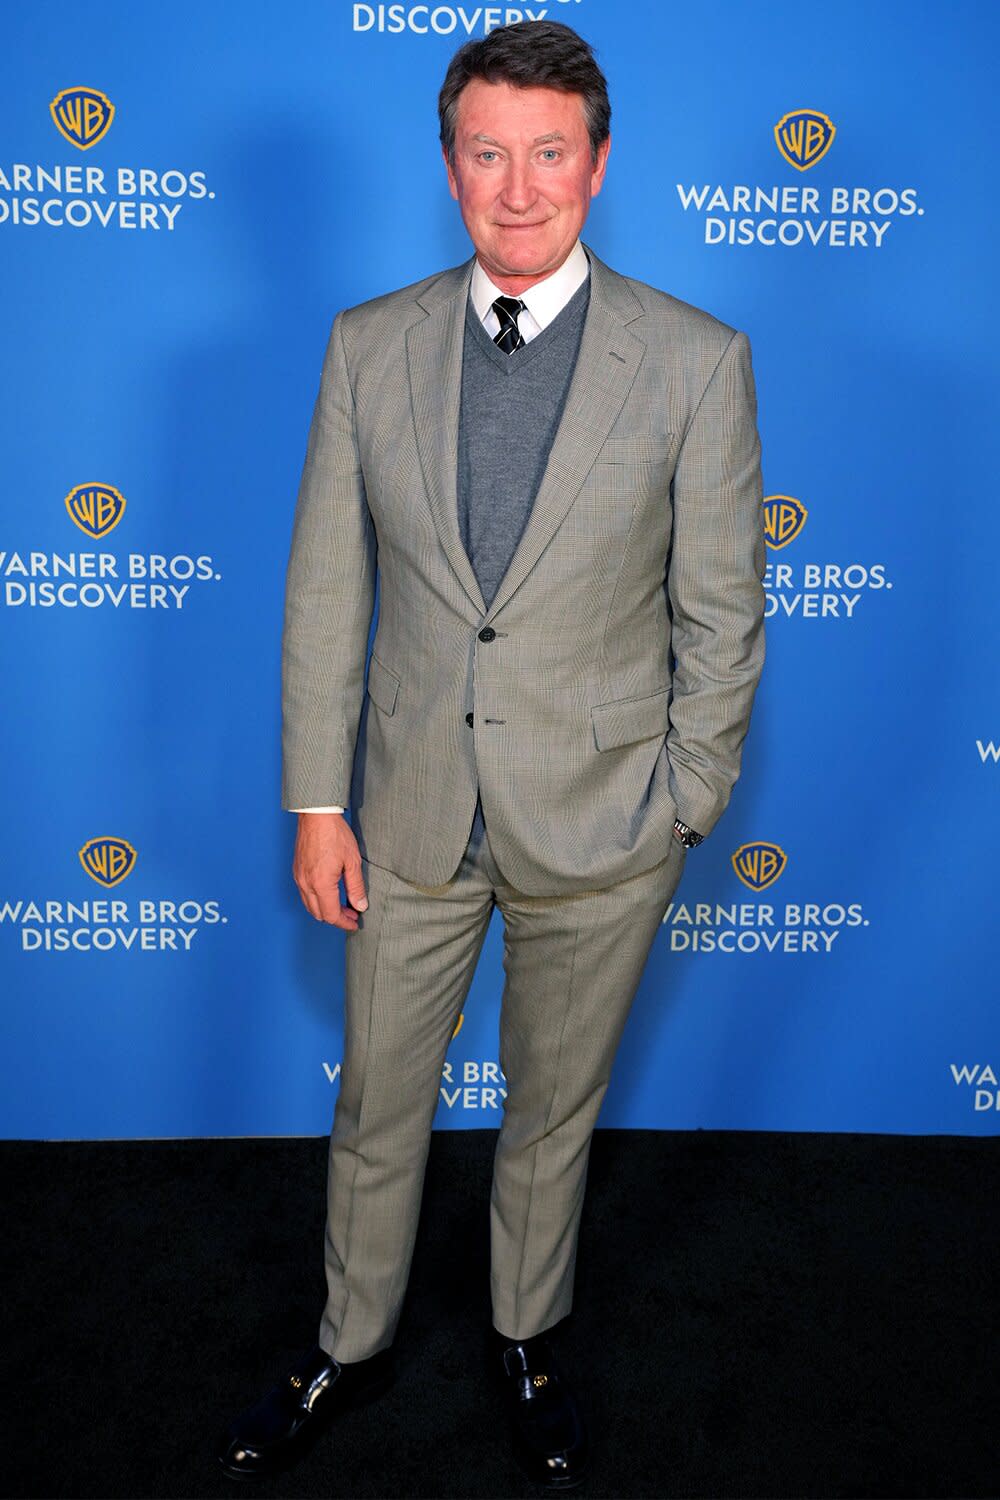 Wayne Gretzky, NHL on TNT, Turner Sports attends the Warner Bros. Discovery Upfront 2022 arrivals on the red carpet at The Theater at Madison Square Garden on May 18, 2022 in New York City.